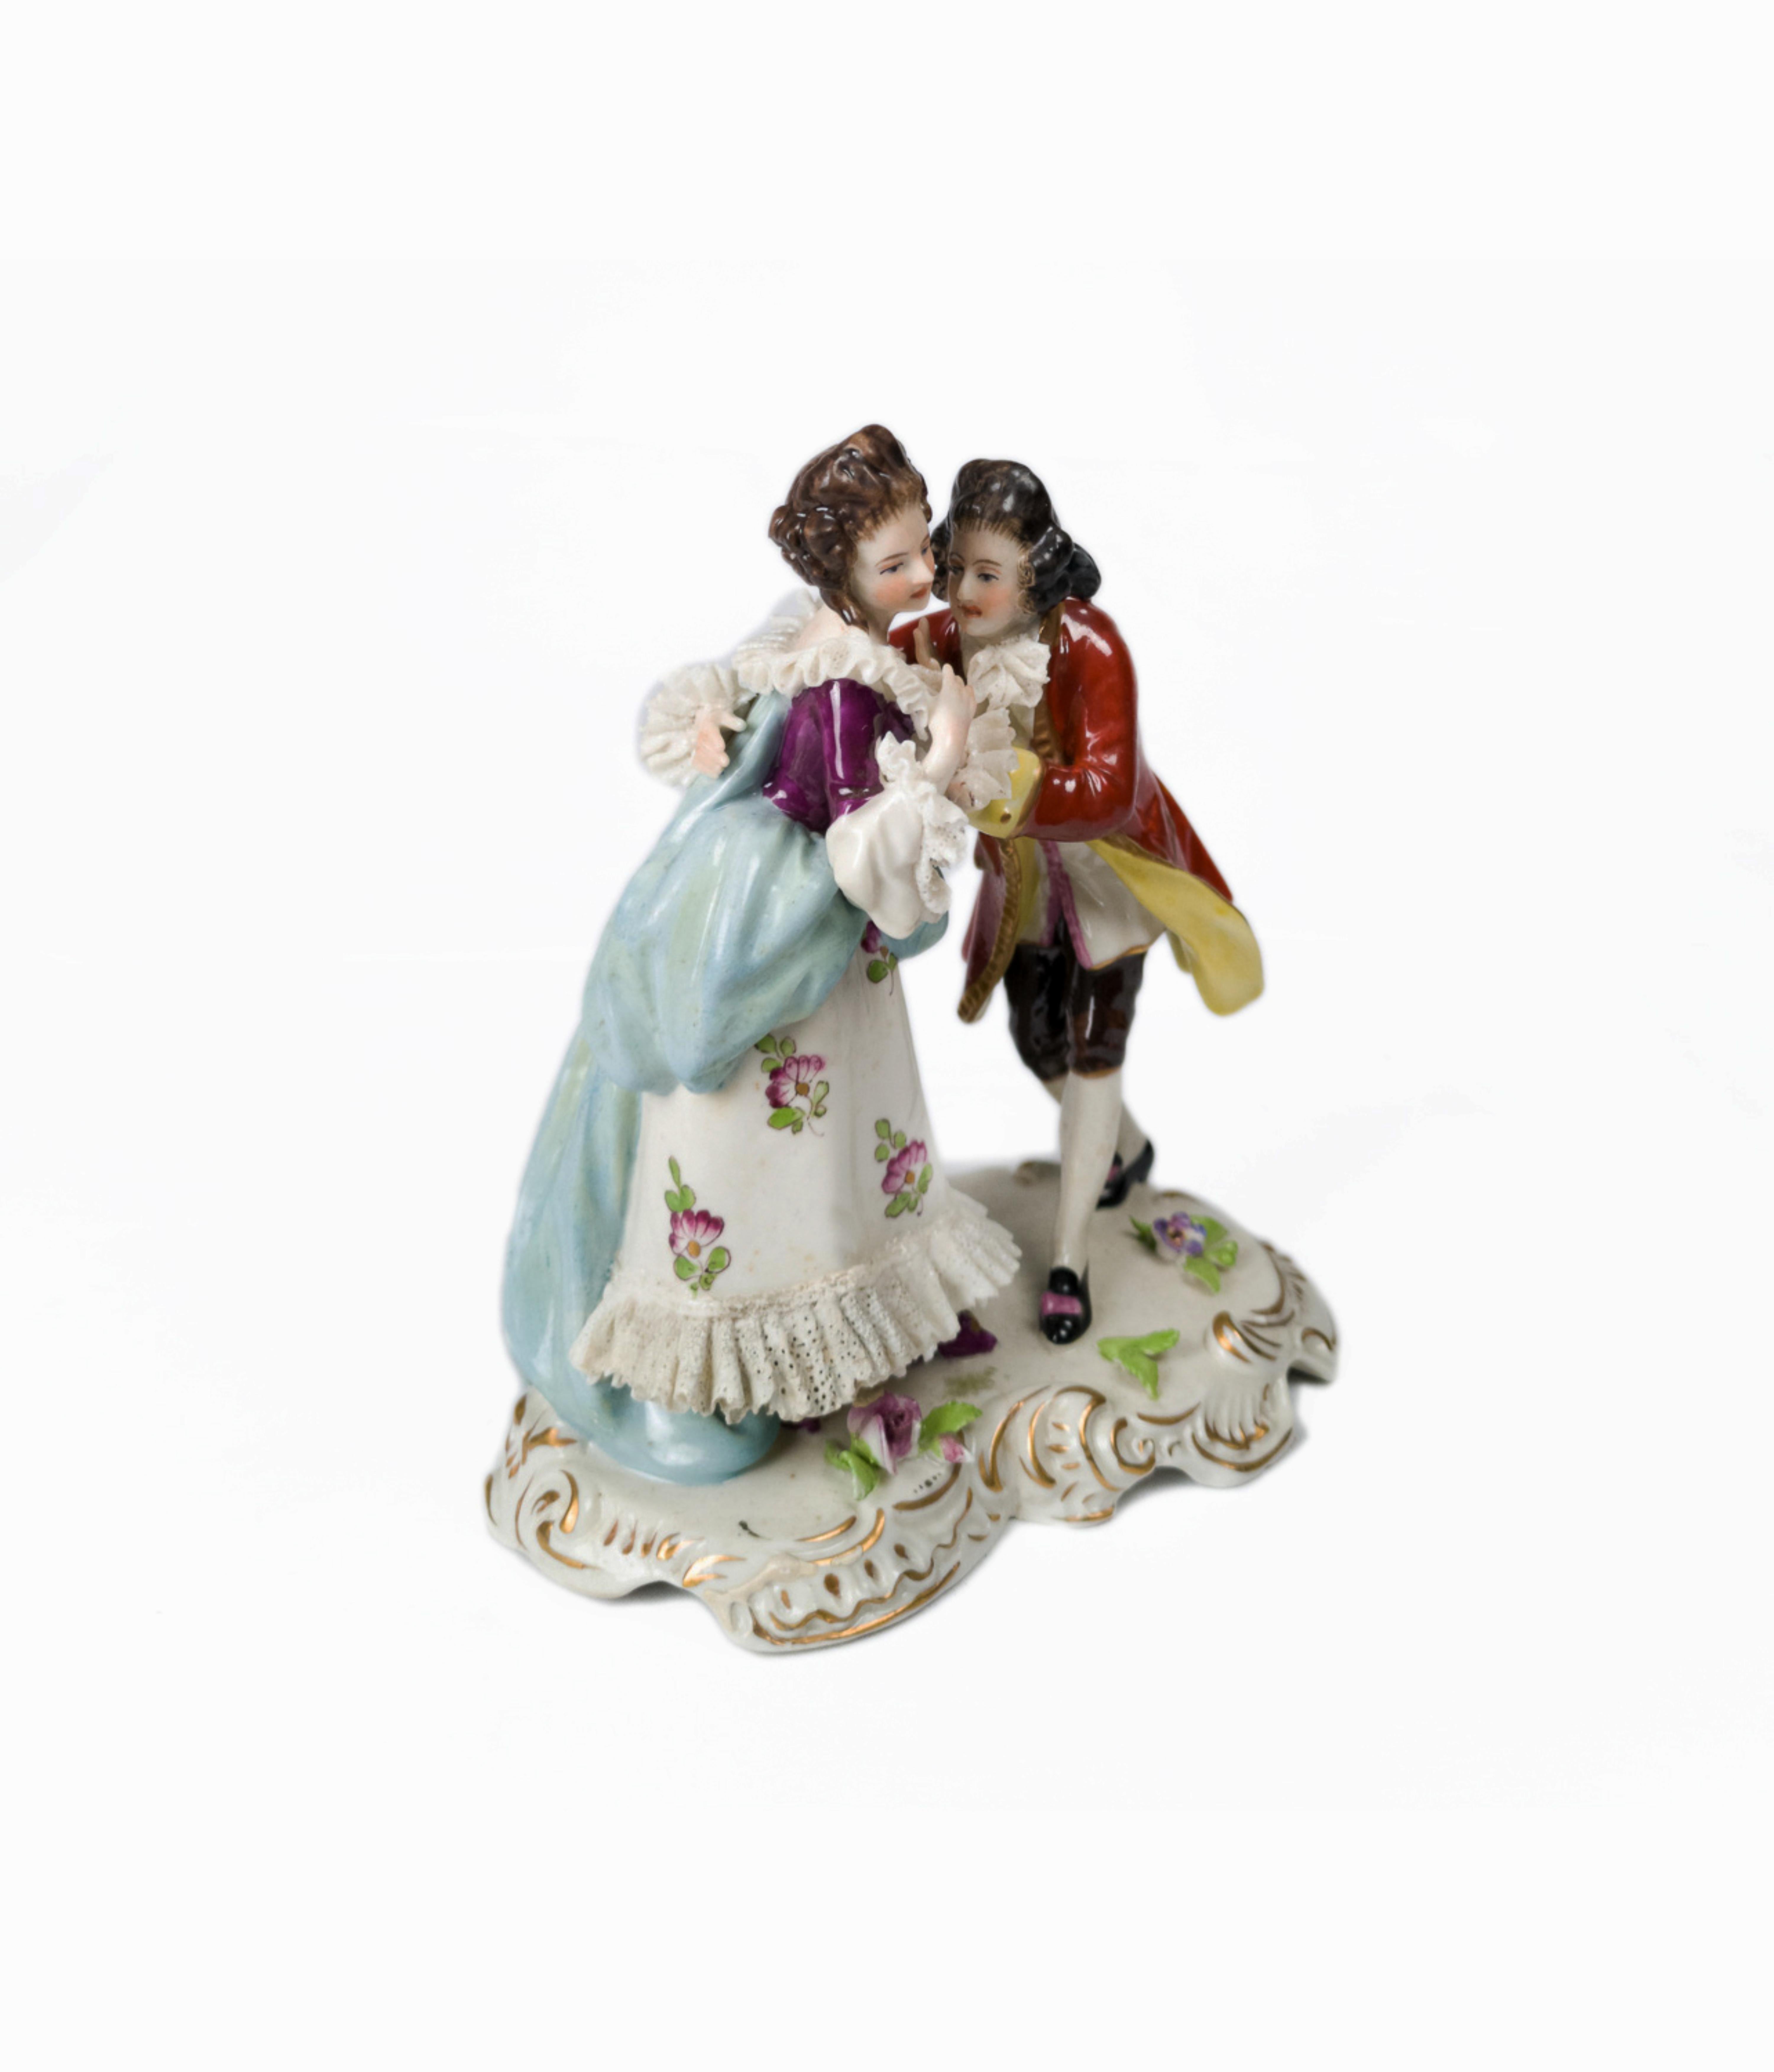 A porcelain figure of a kissing couple, a very fine soft piece from Volkstedt with a mark on the base and the date 